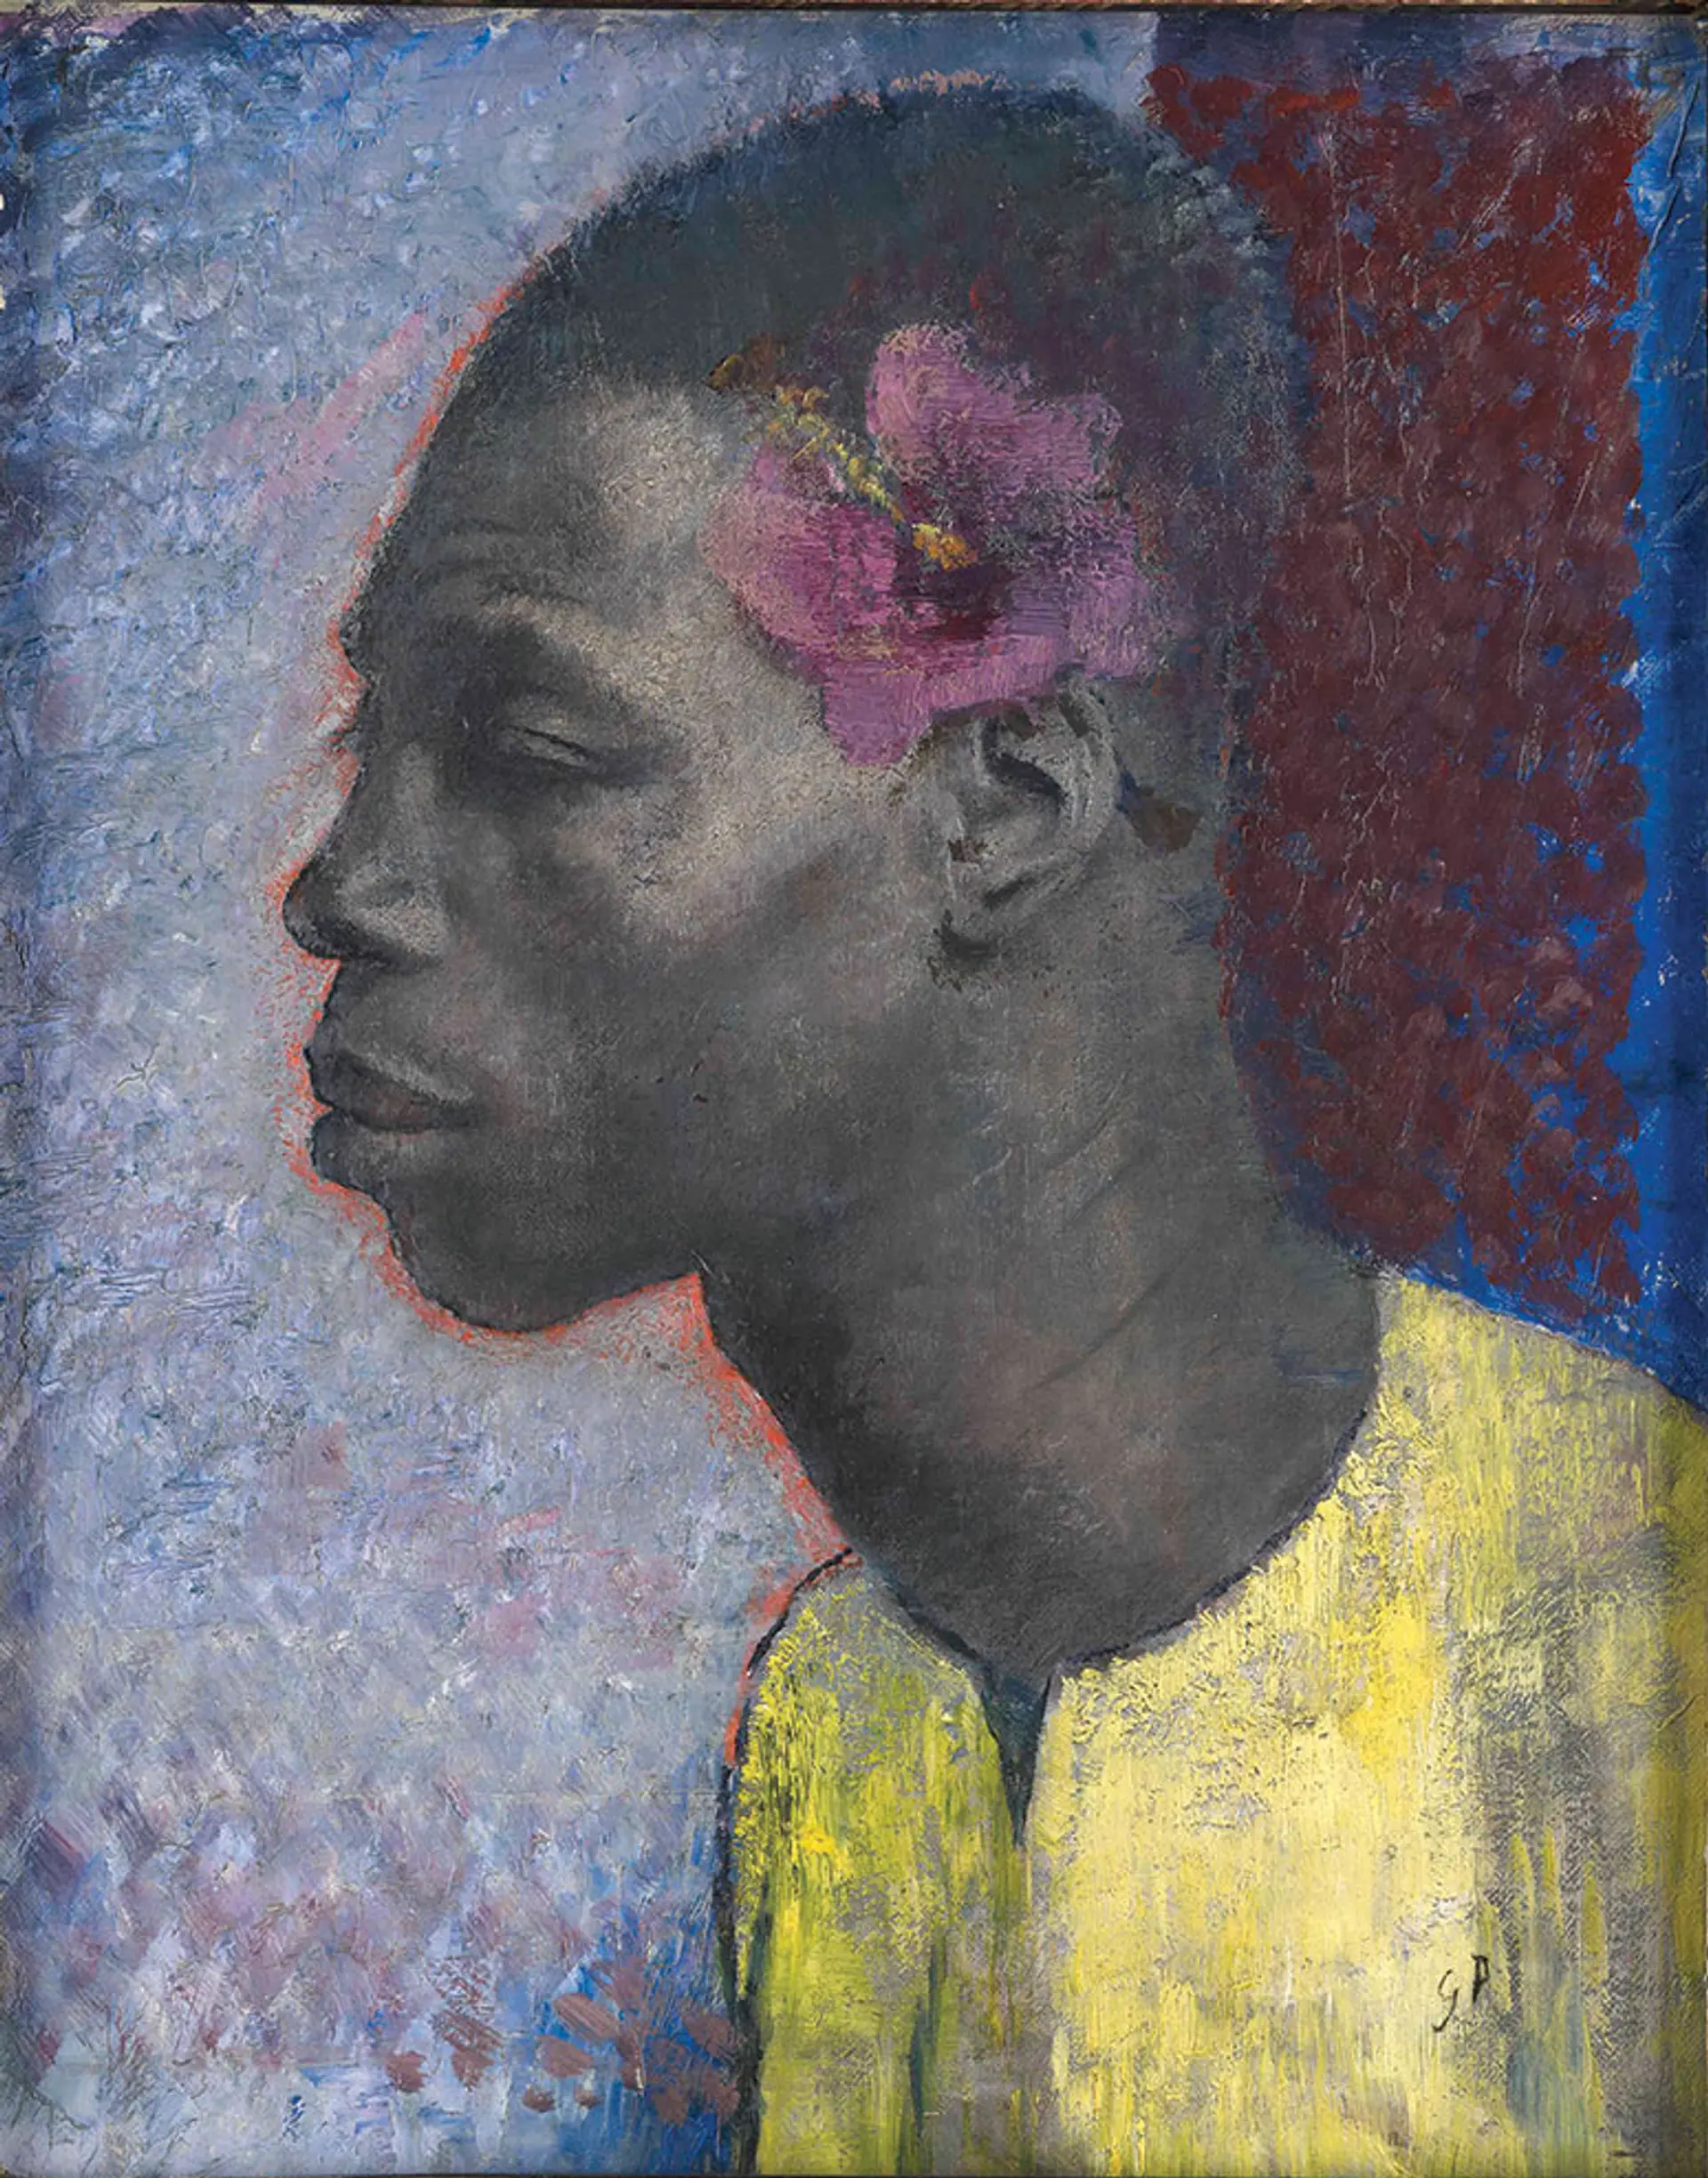 Glyn Philpot’s Profile of a Man with Hibiscus Flower (Félix) from 1932 is one of several portraits of Black people, including one of the actor Paul Robeson Photo © Piano Nobile